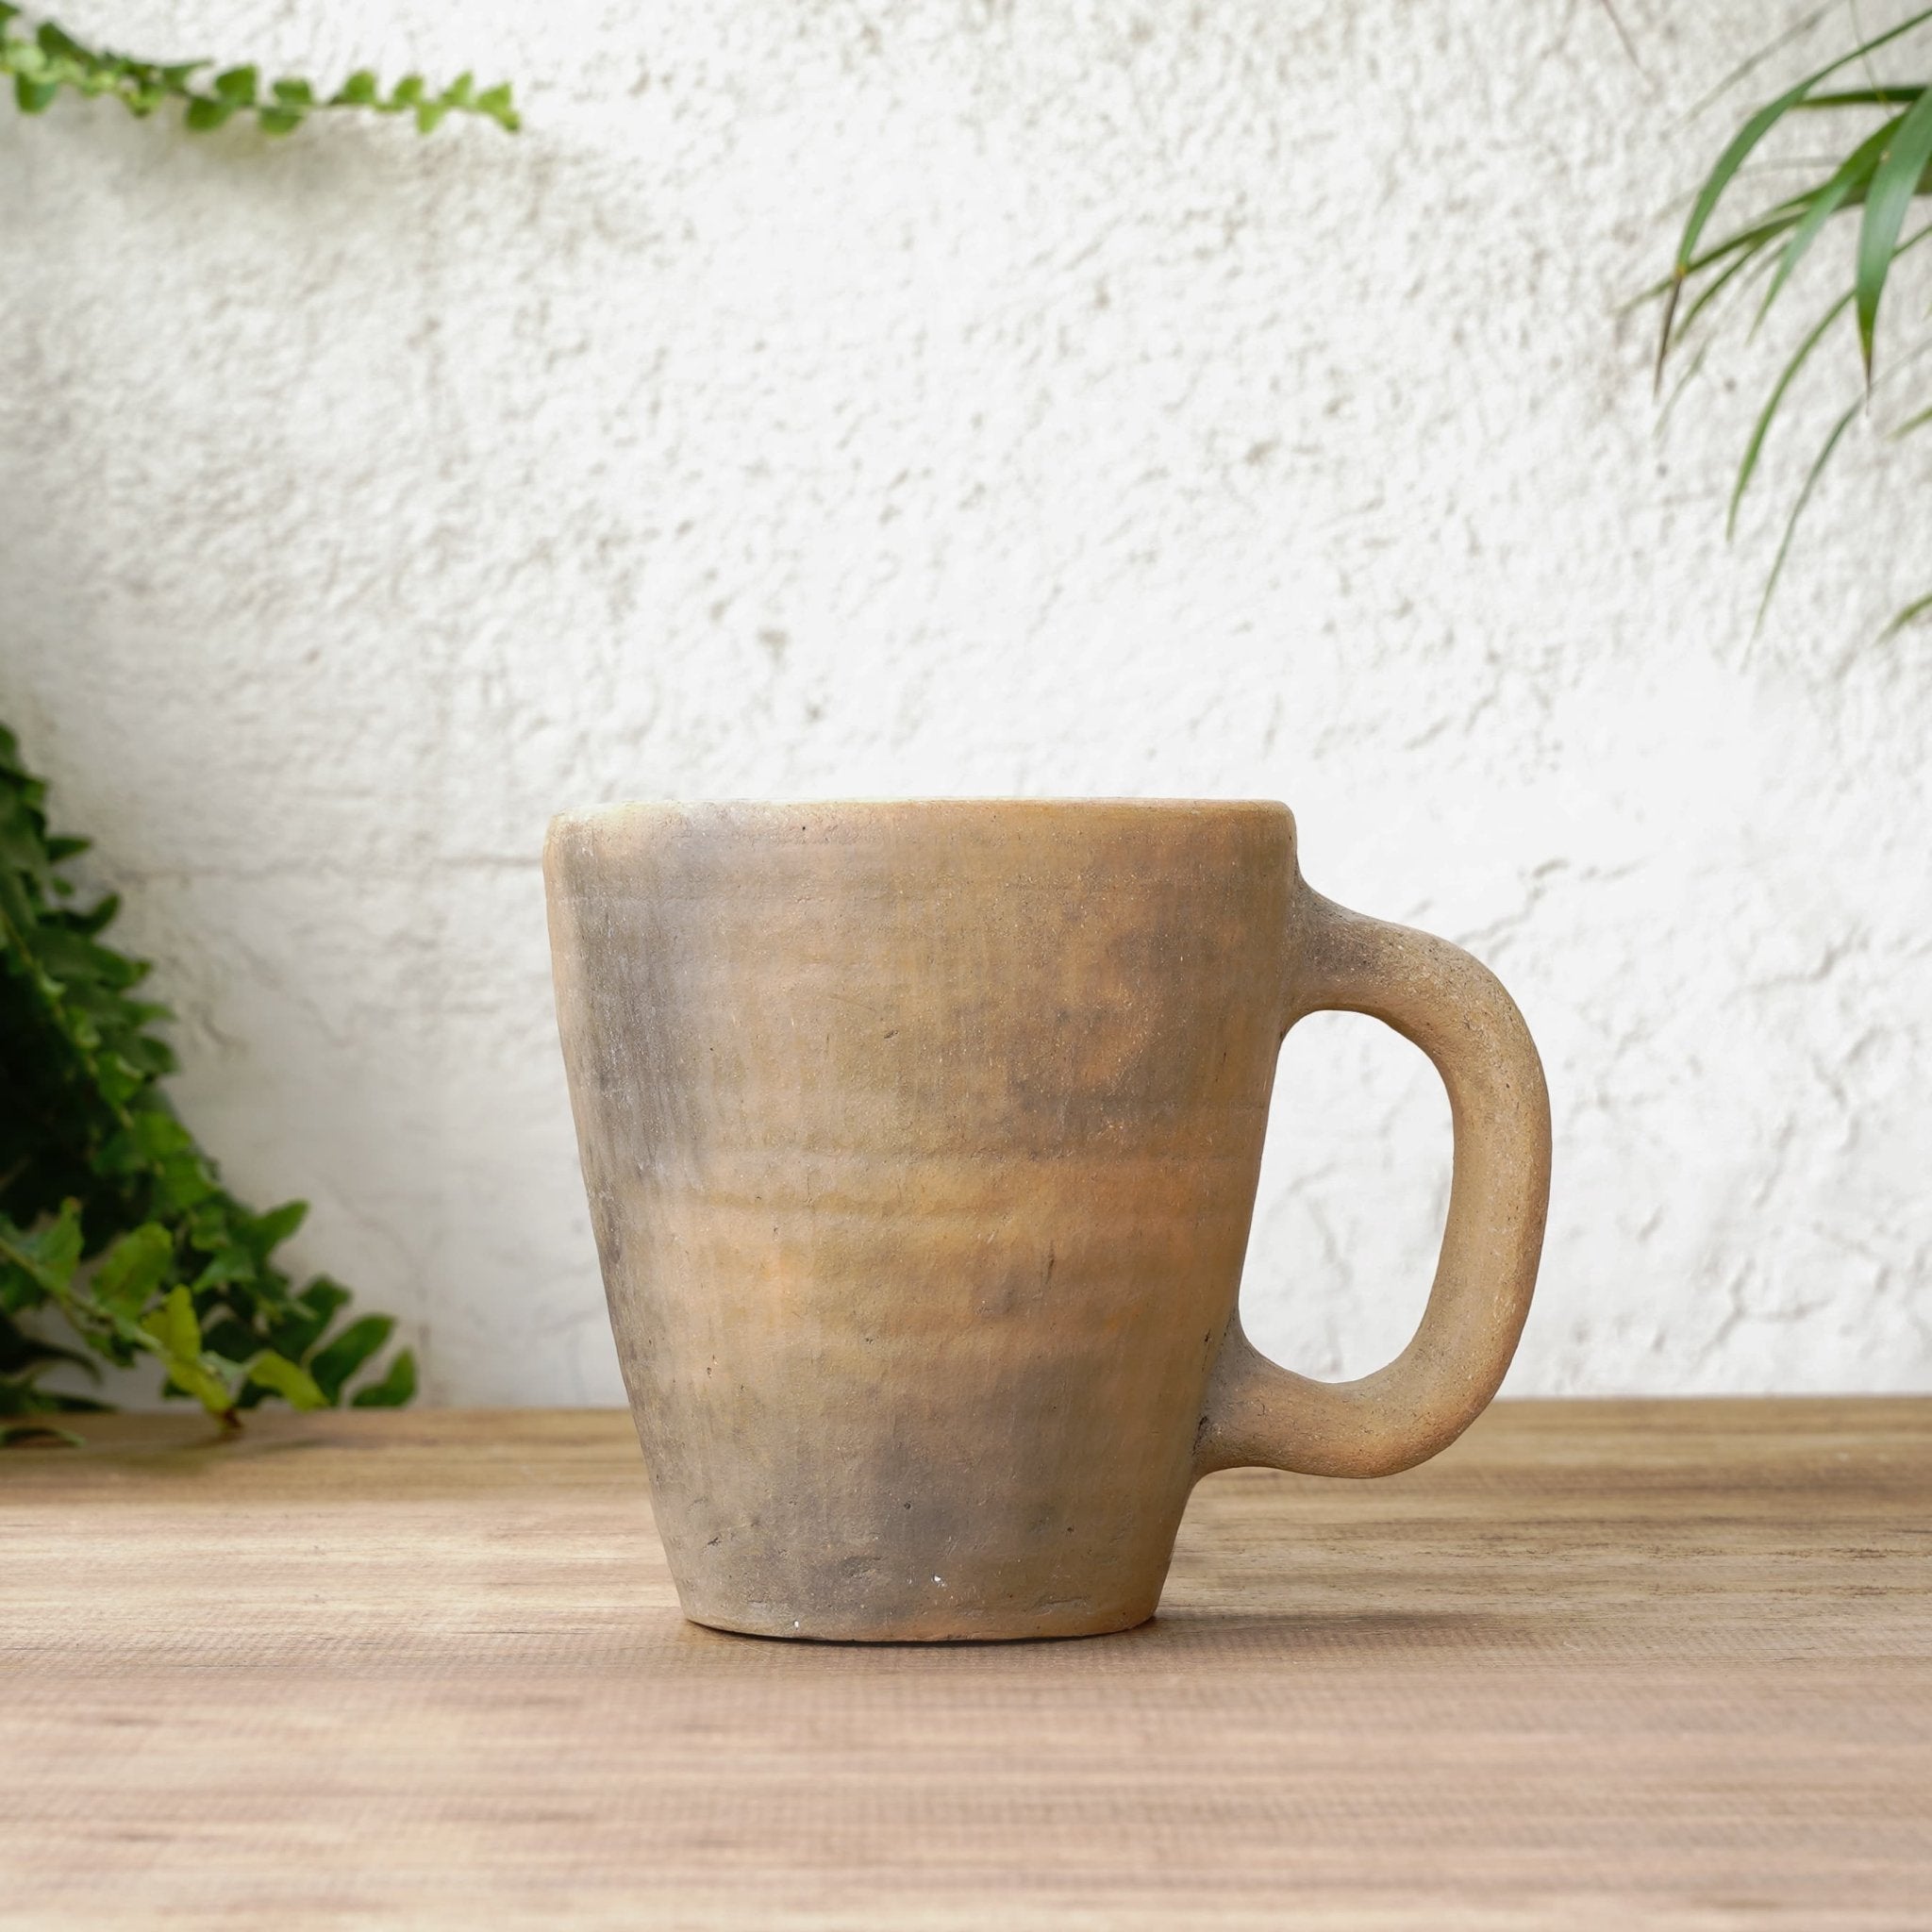 Large Natural Handmade Ceramic Mug by Taller Pitao Copycha, showcasing its beige marble color